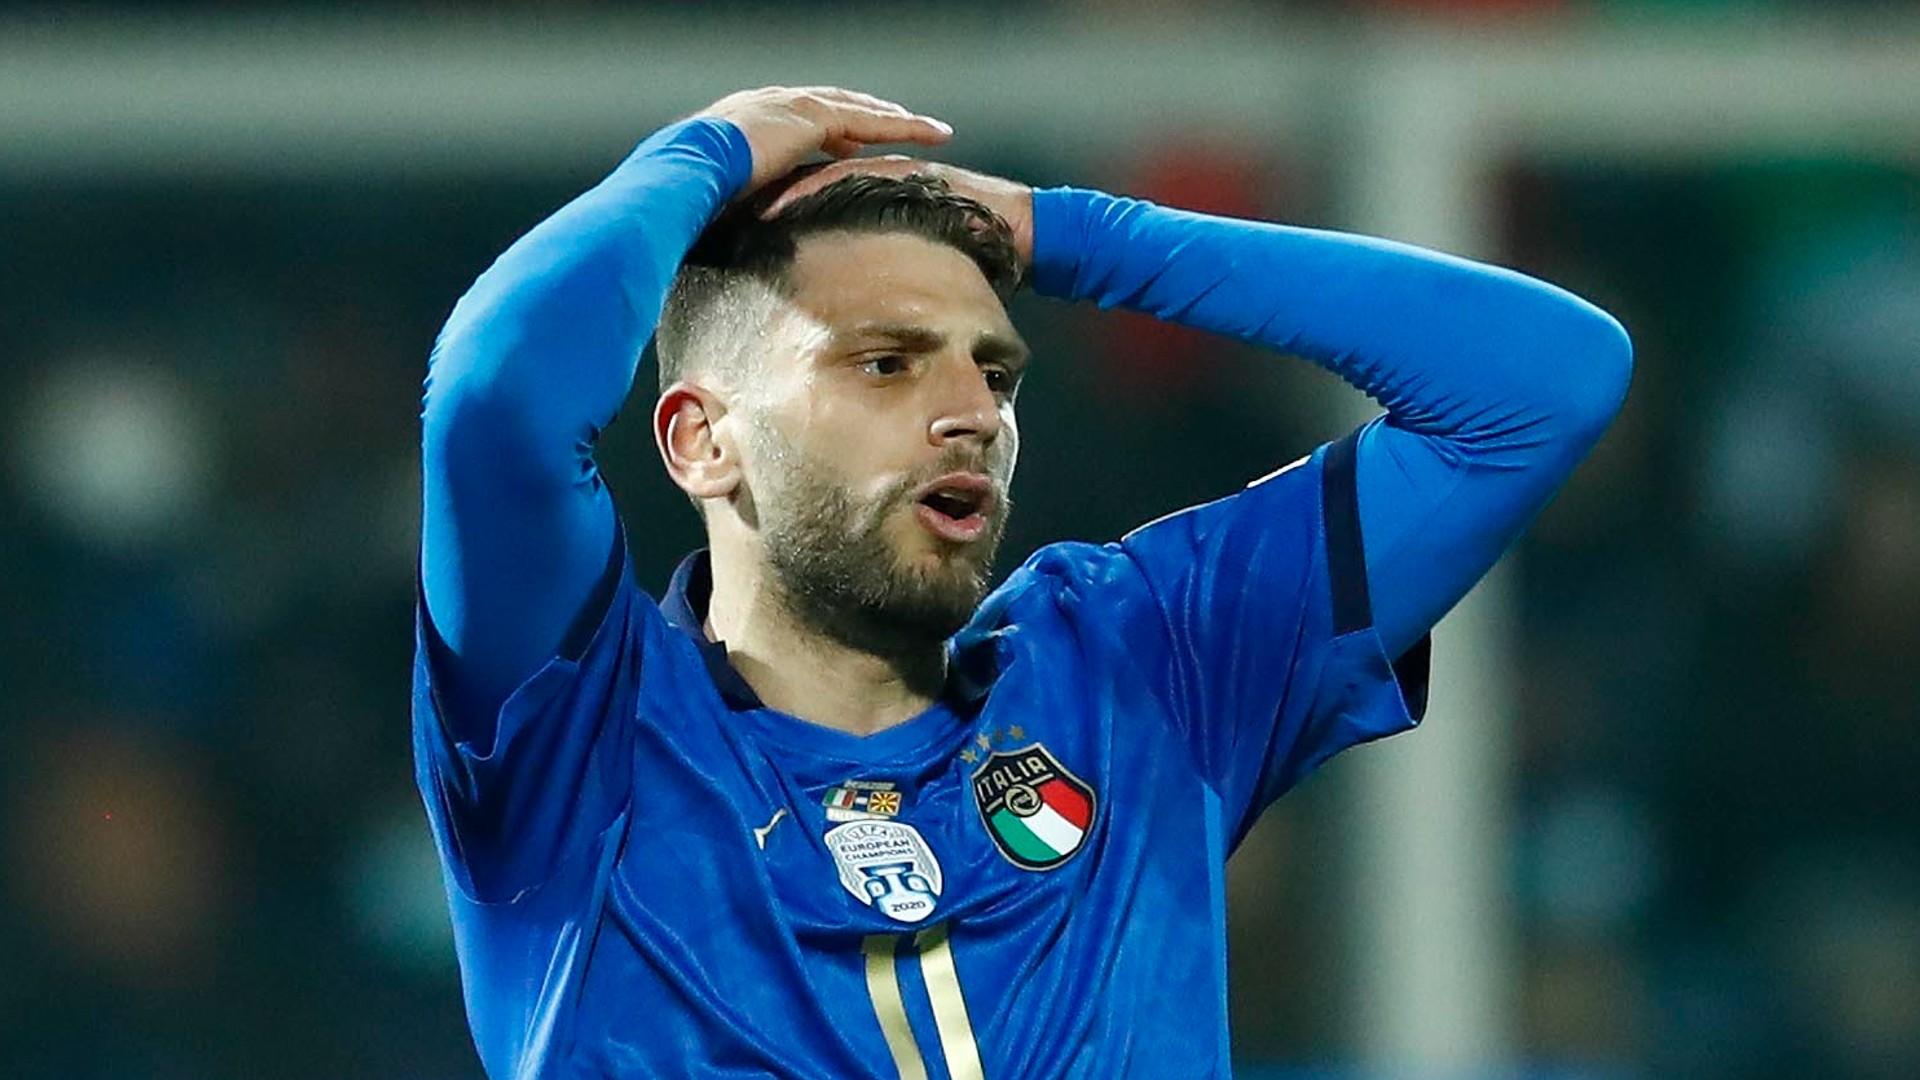 Italy out of World Cup 2022: Why elimination vs. North Macedonia is a big deal and historic failure